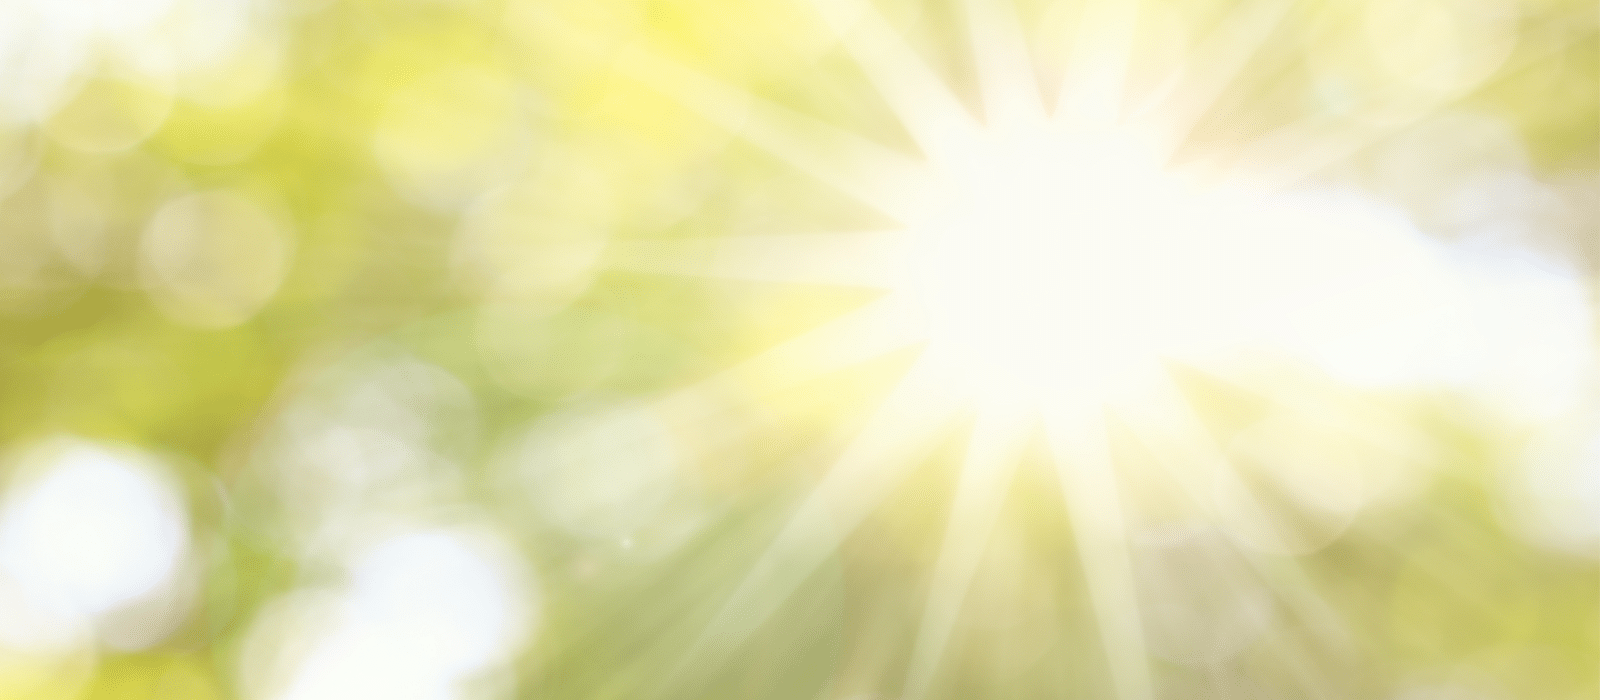 Image of sun coming through branches on PSA Financial's website